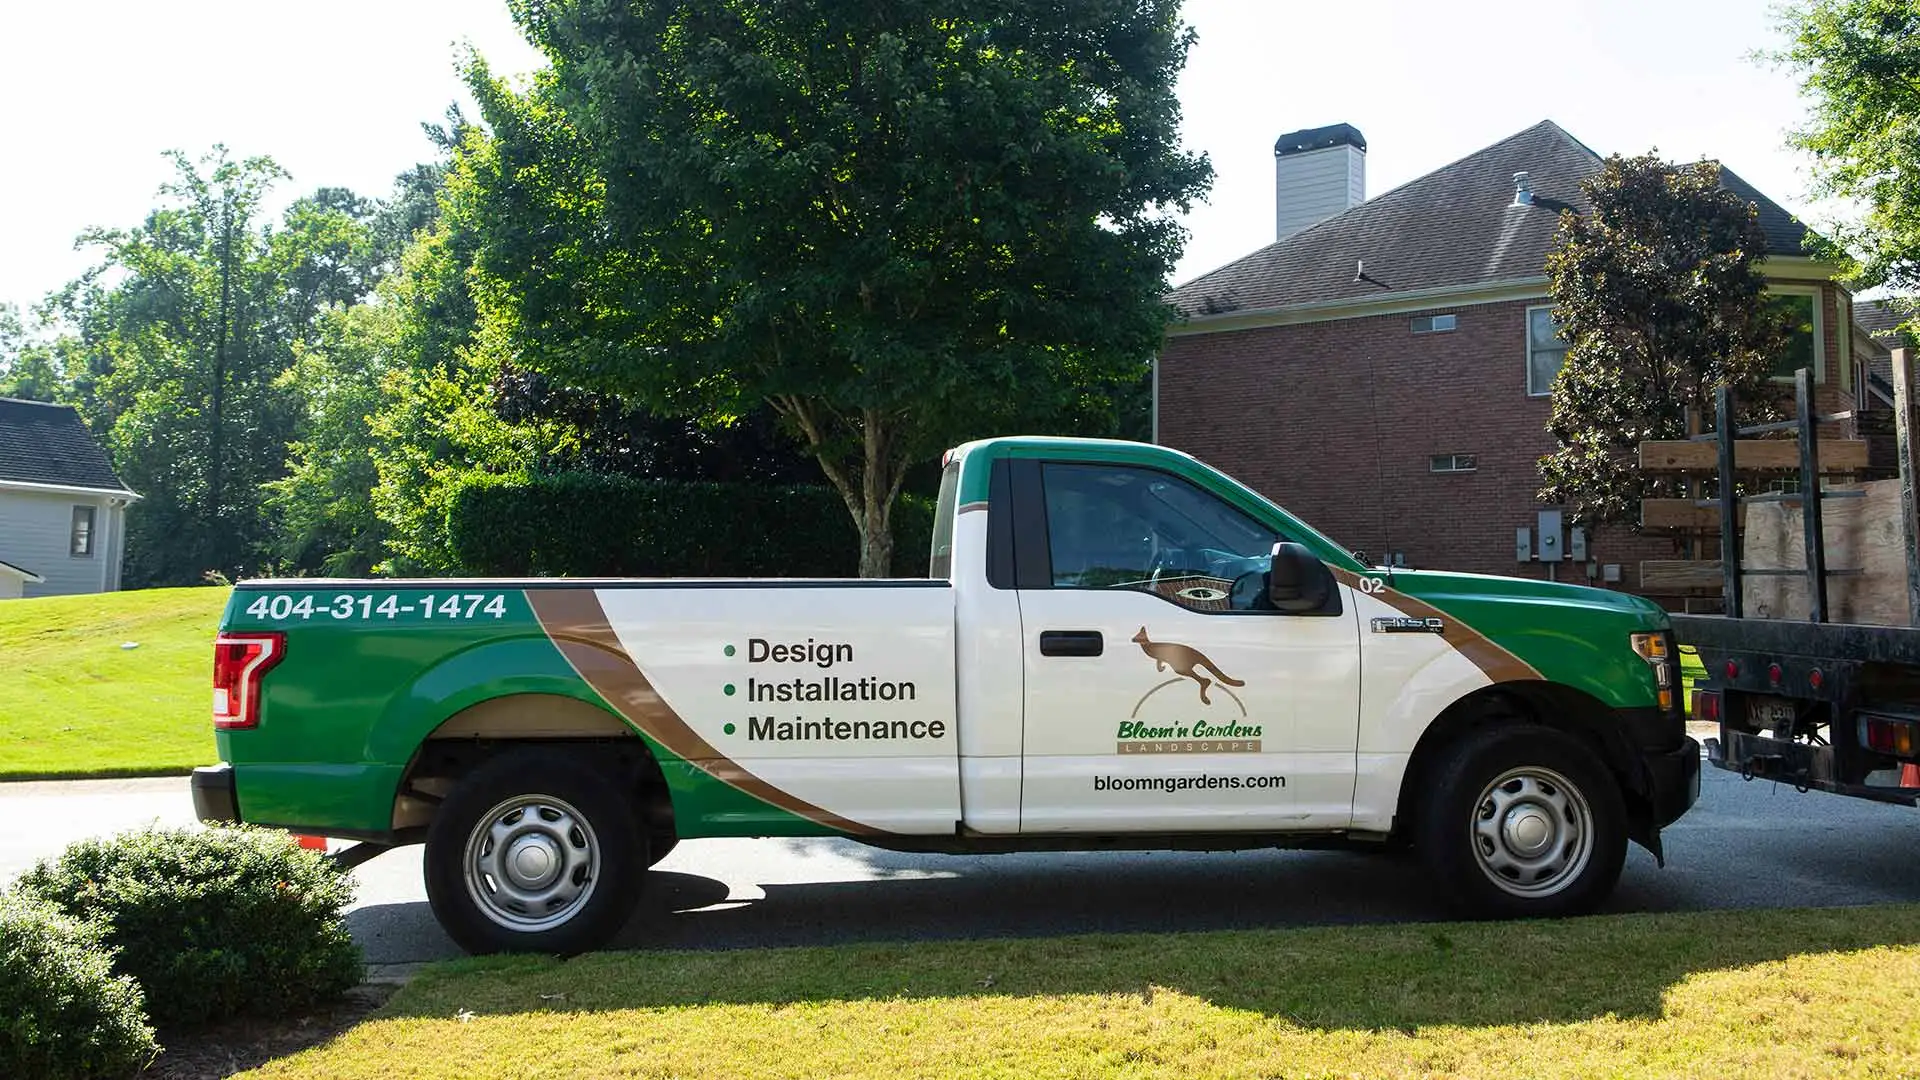 A Bloom’n Gardens Landscape work truck after completing a landscaping project in Atlanta, GA.